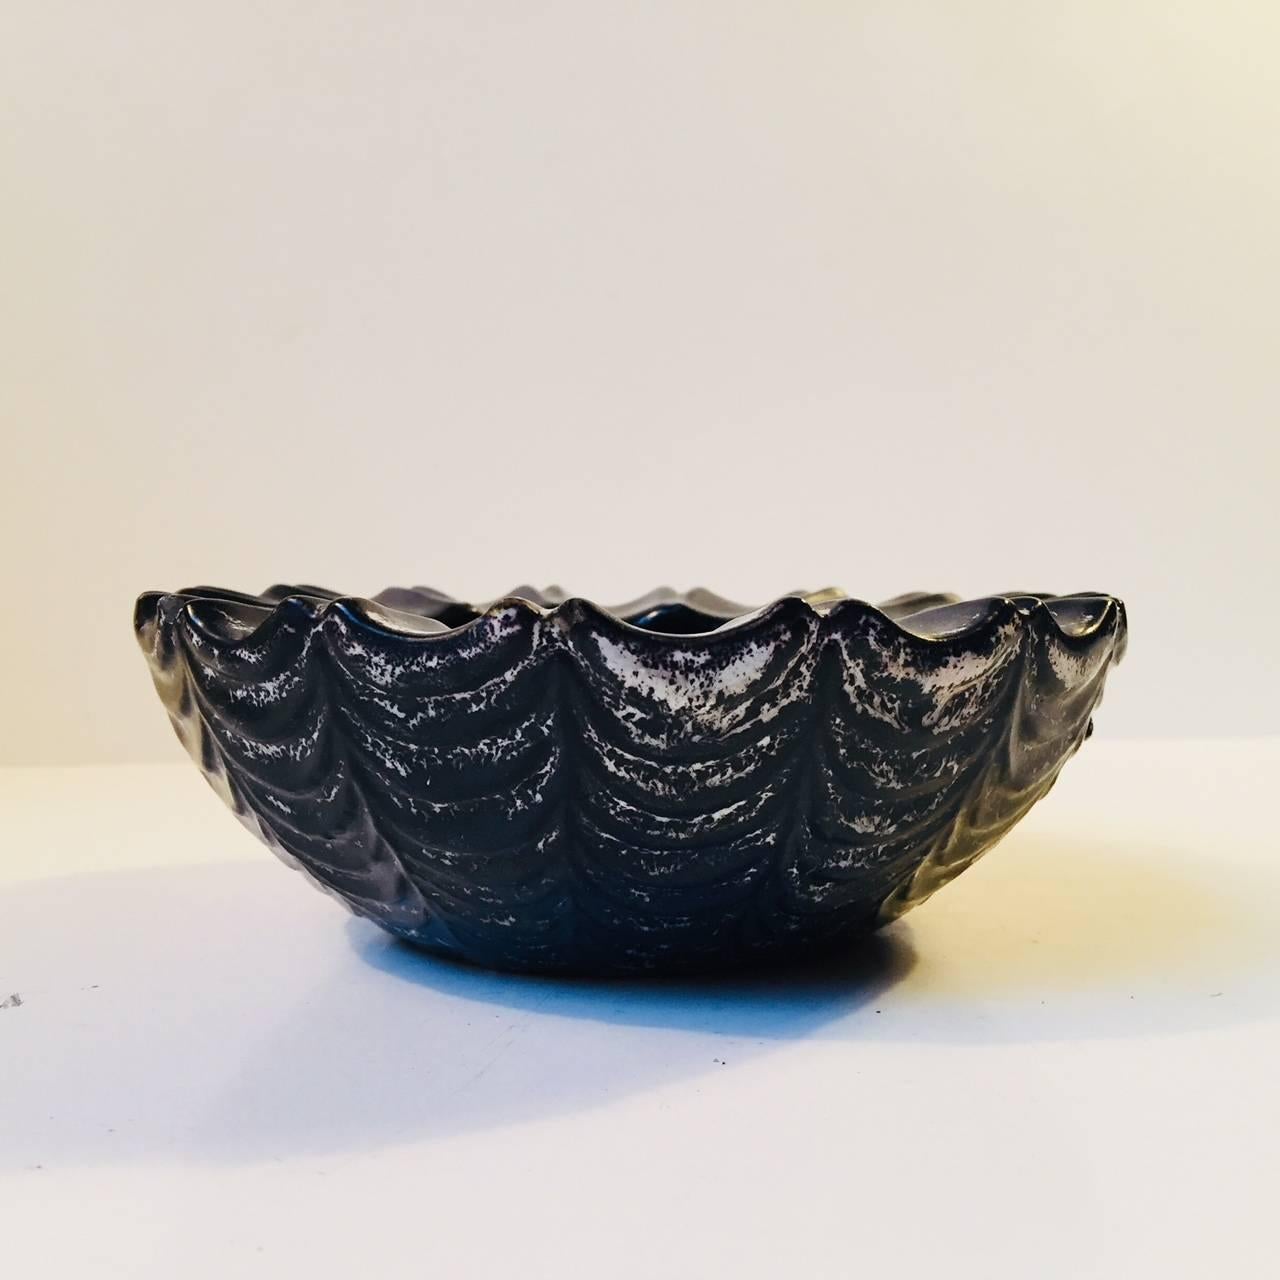 This fluted bowl features the signature coal based glaze by Hammershøi, and was produced circa 1920 by HAK/Kähler in Denmark. Fully stamped to the base.